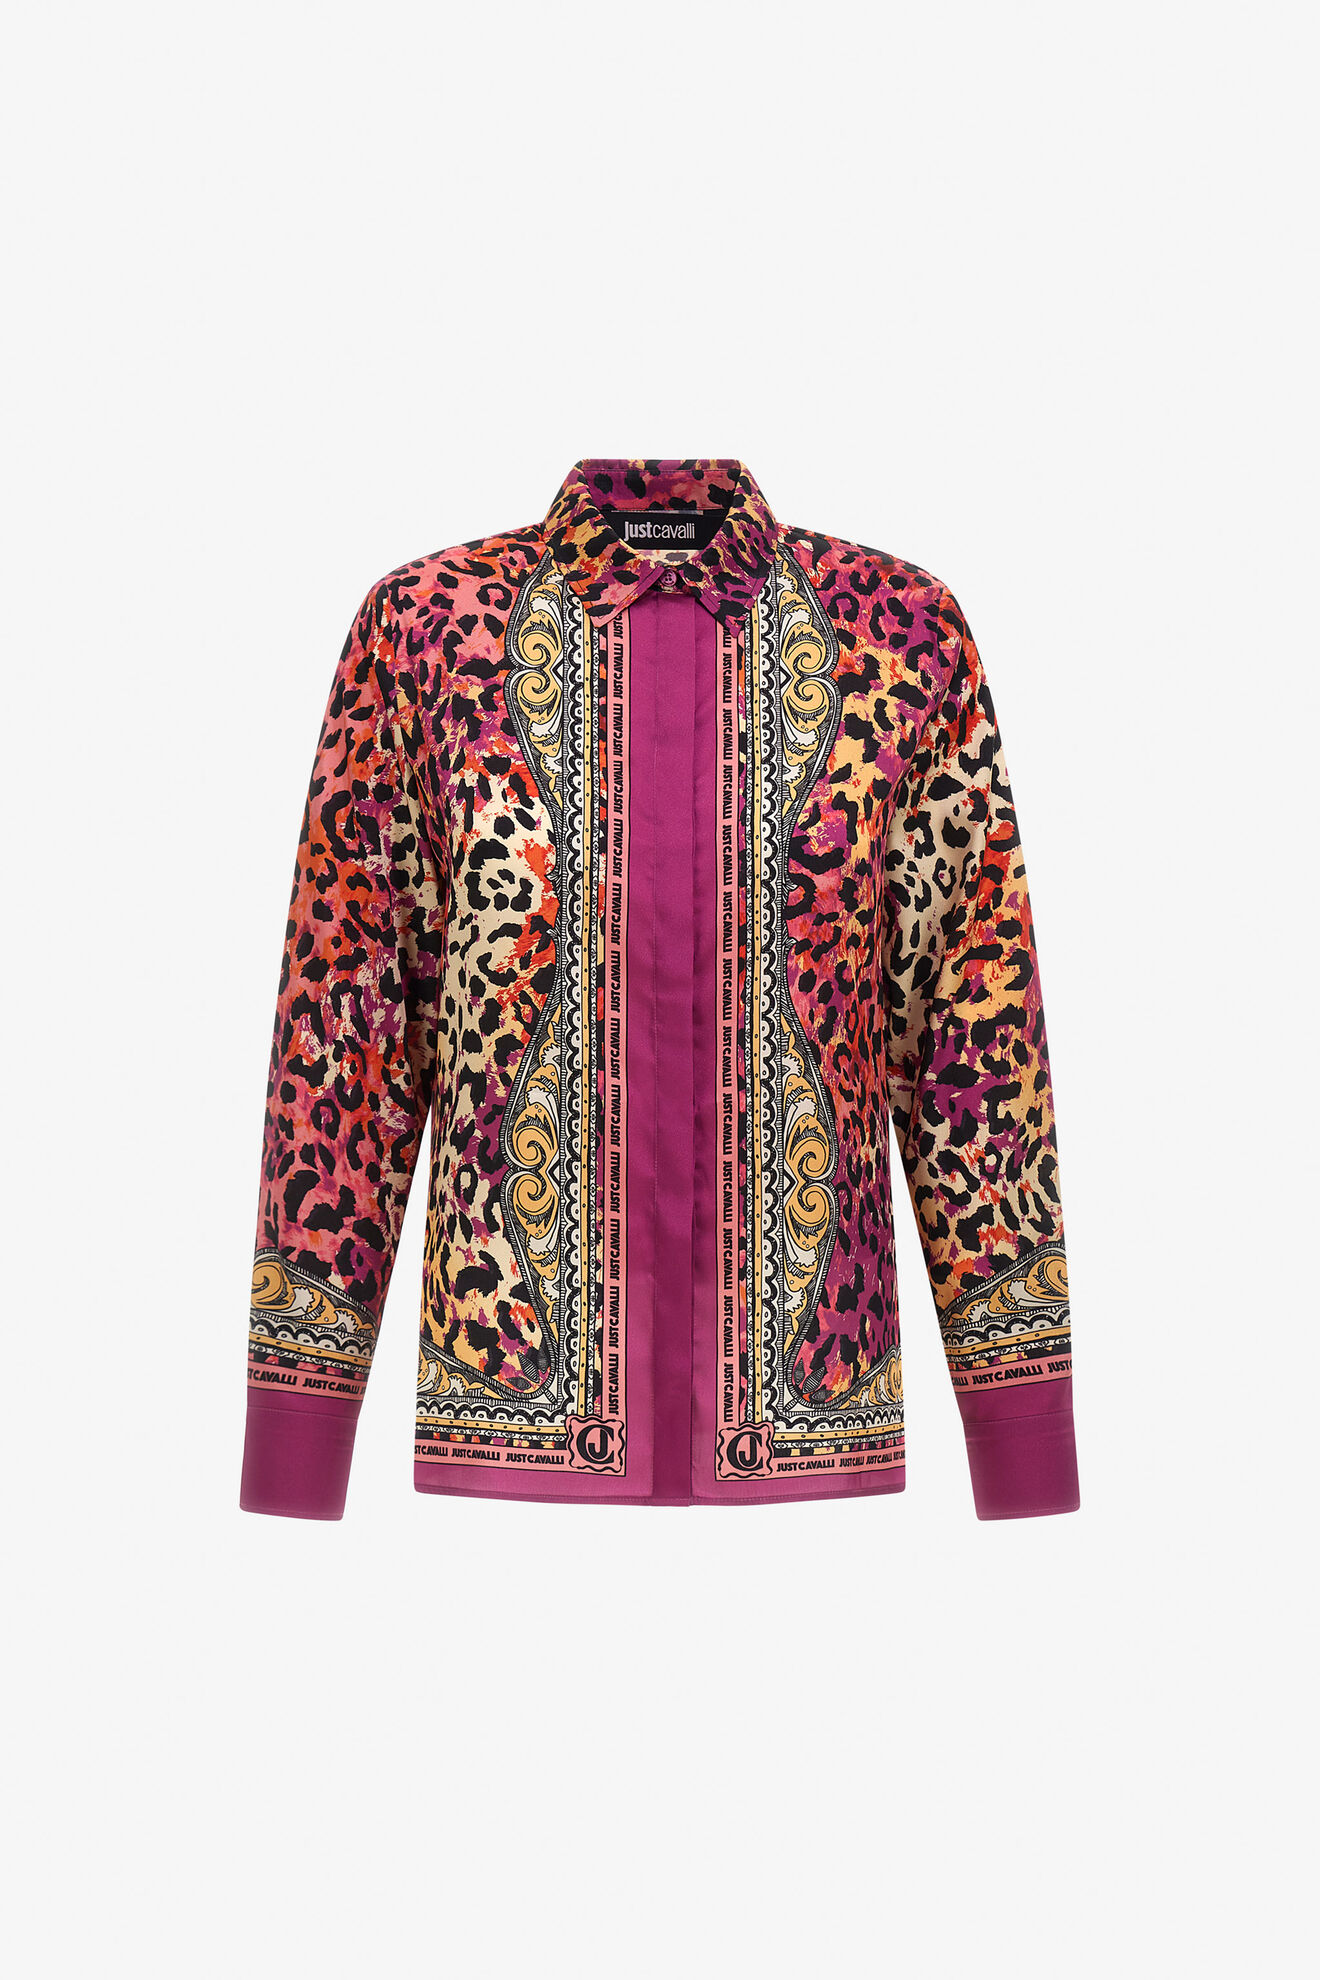 Women's Clothing - Just Cavalli Official Website & Online Store